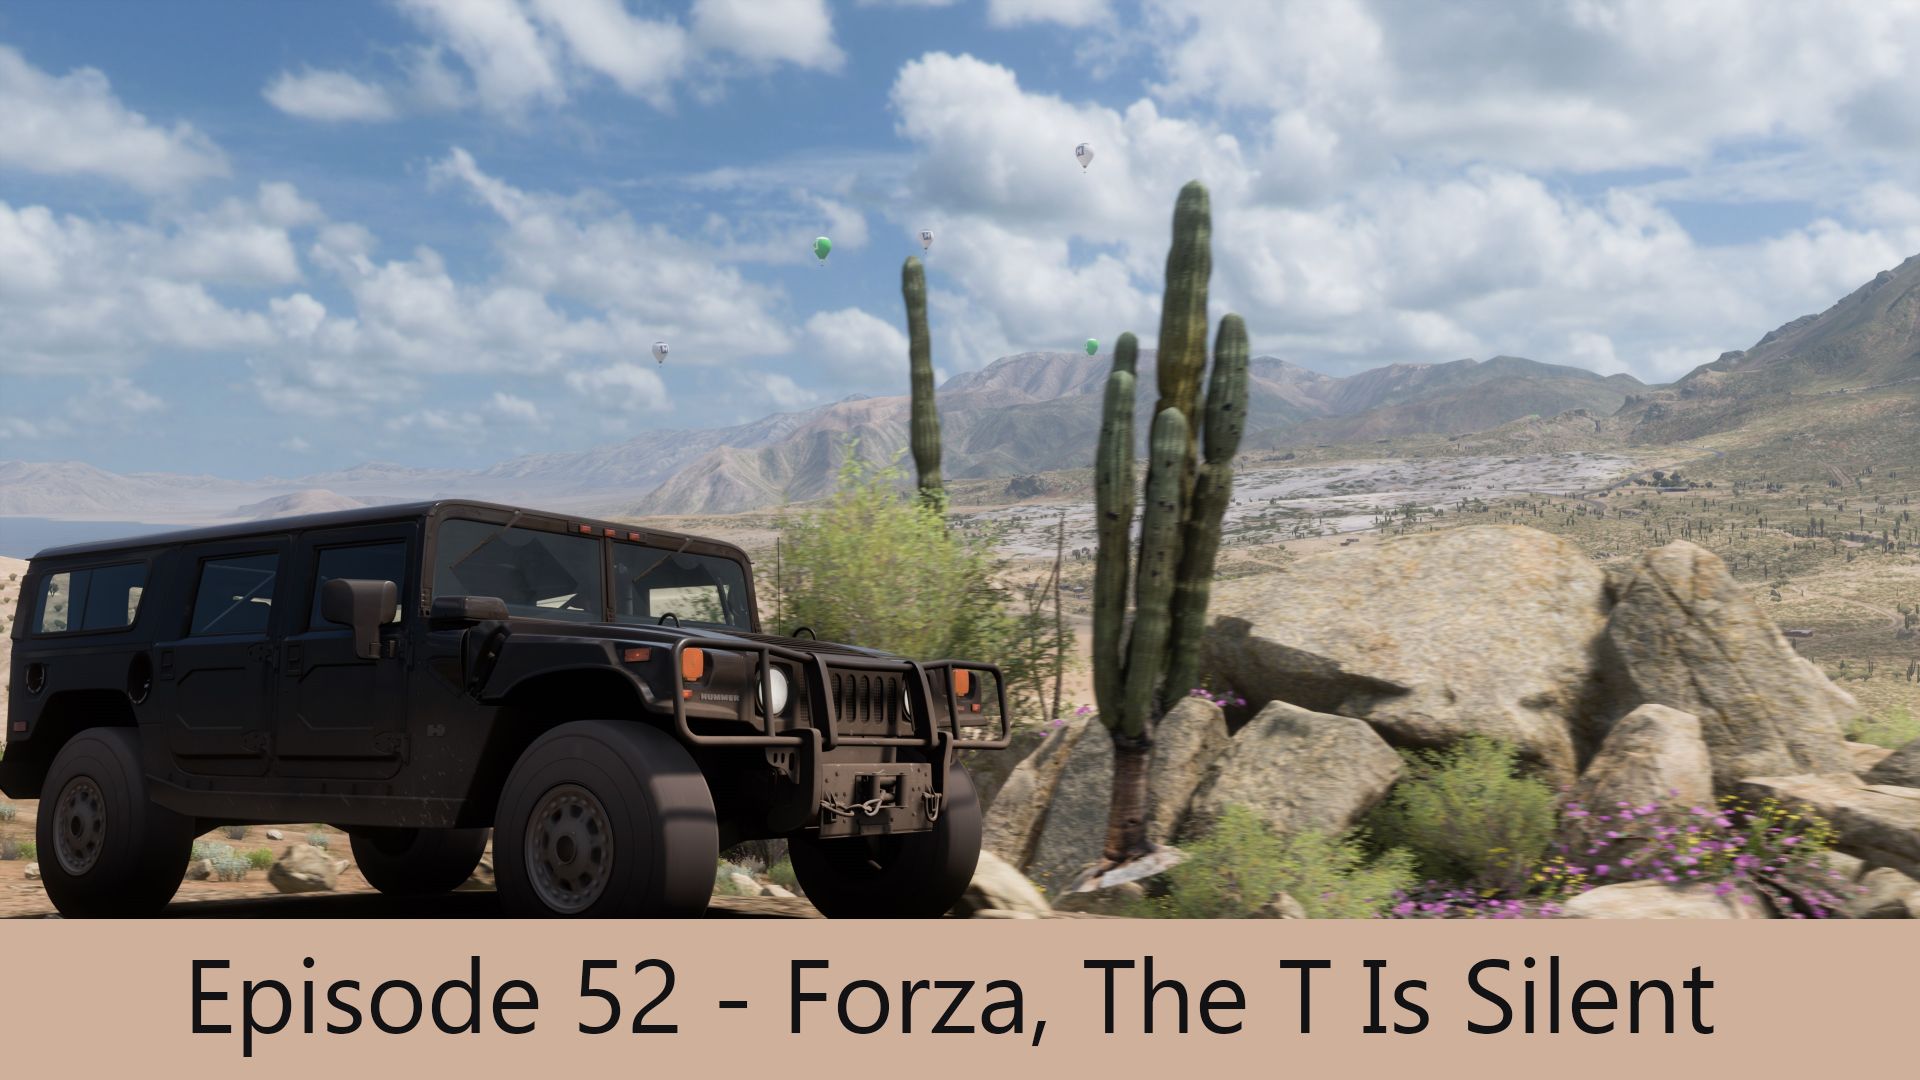 Episode 52 - Forza, The T Is Silent